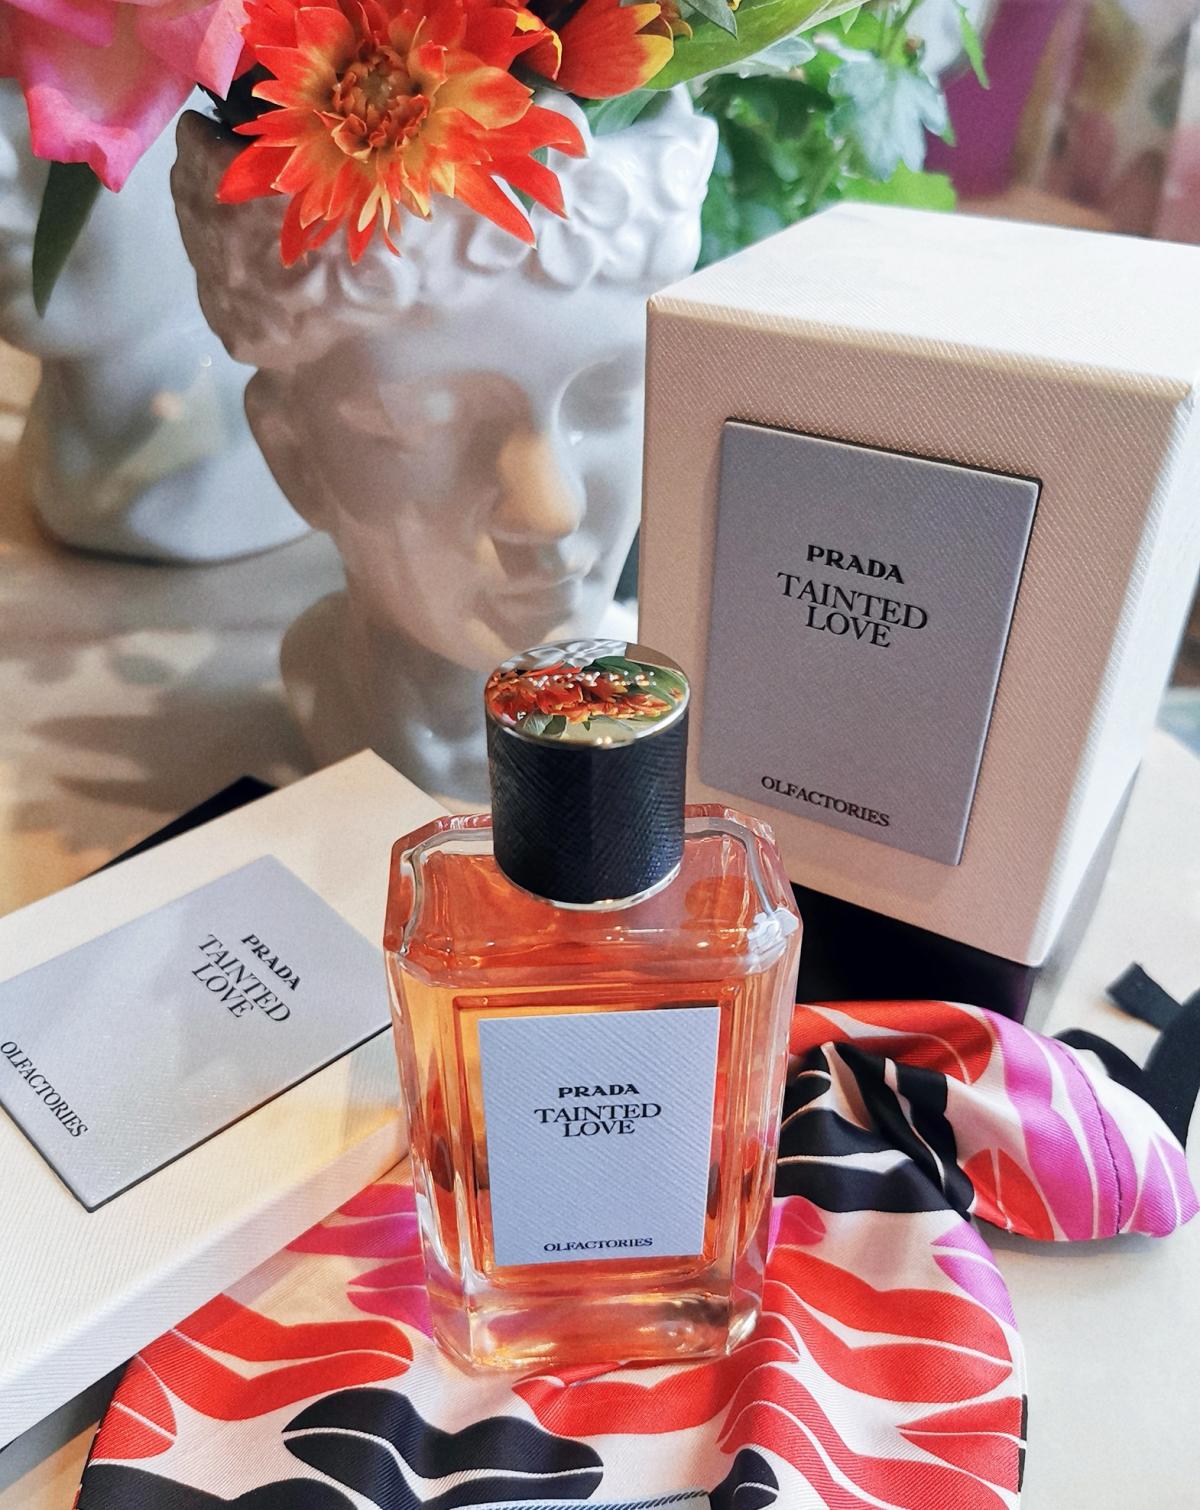 Tainted Love Prada perfume - a fragrance for women and men 2015